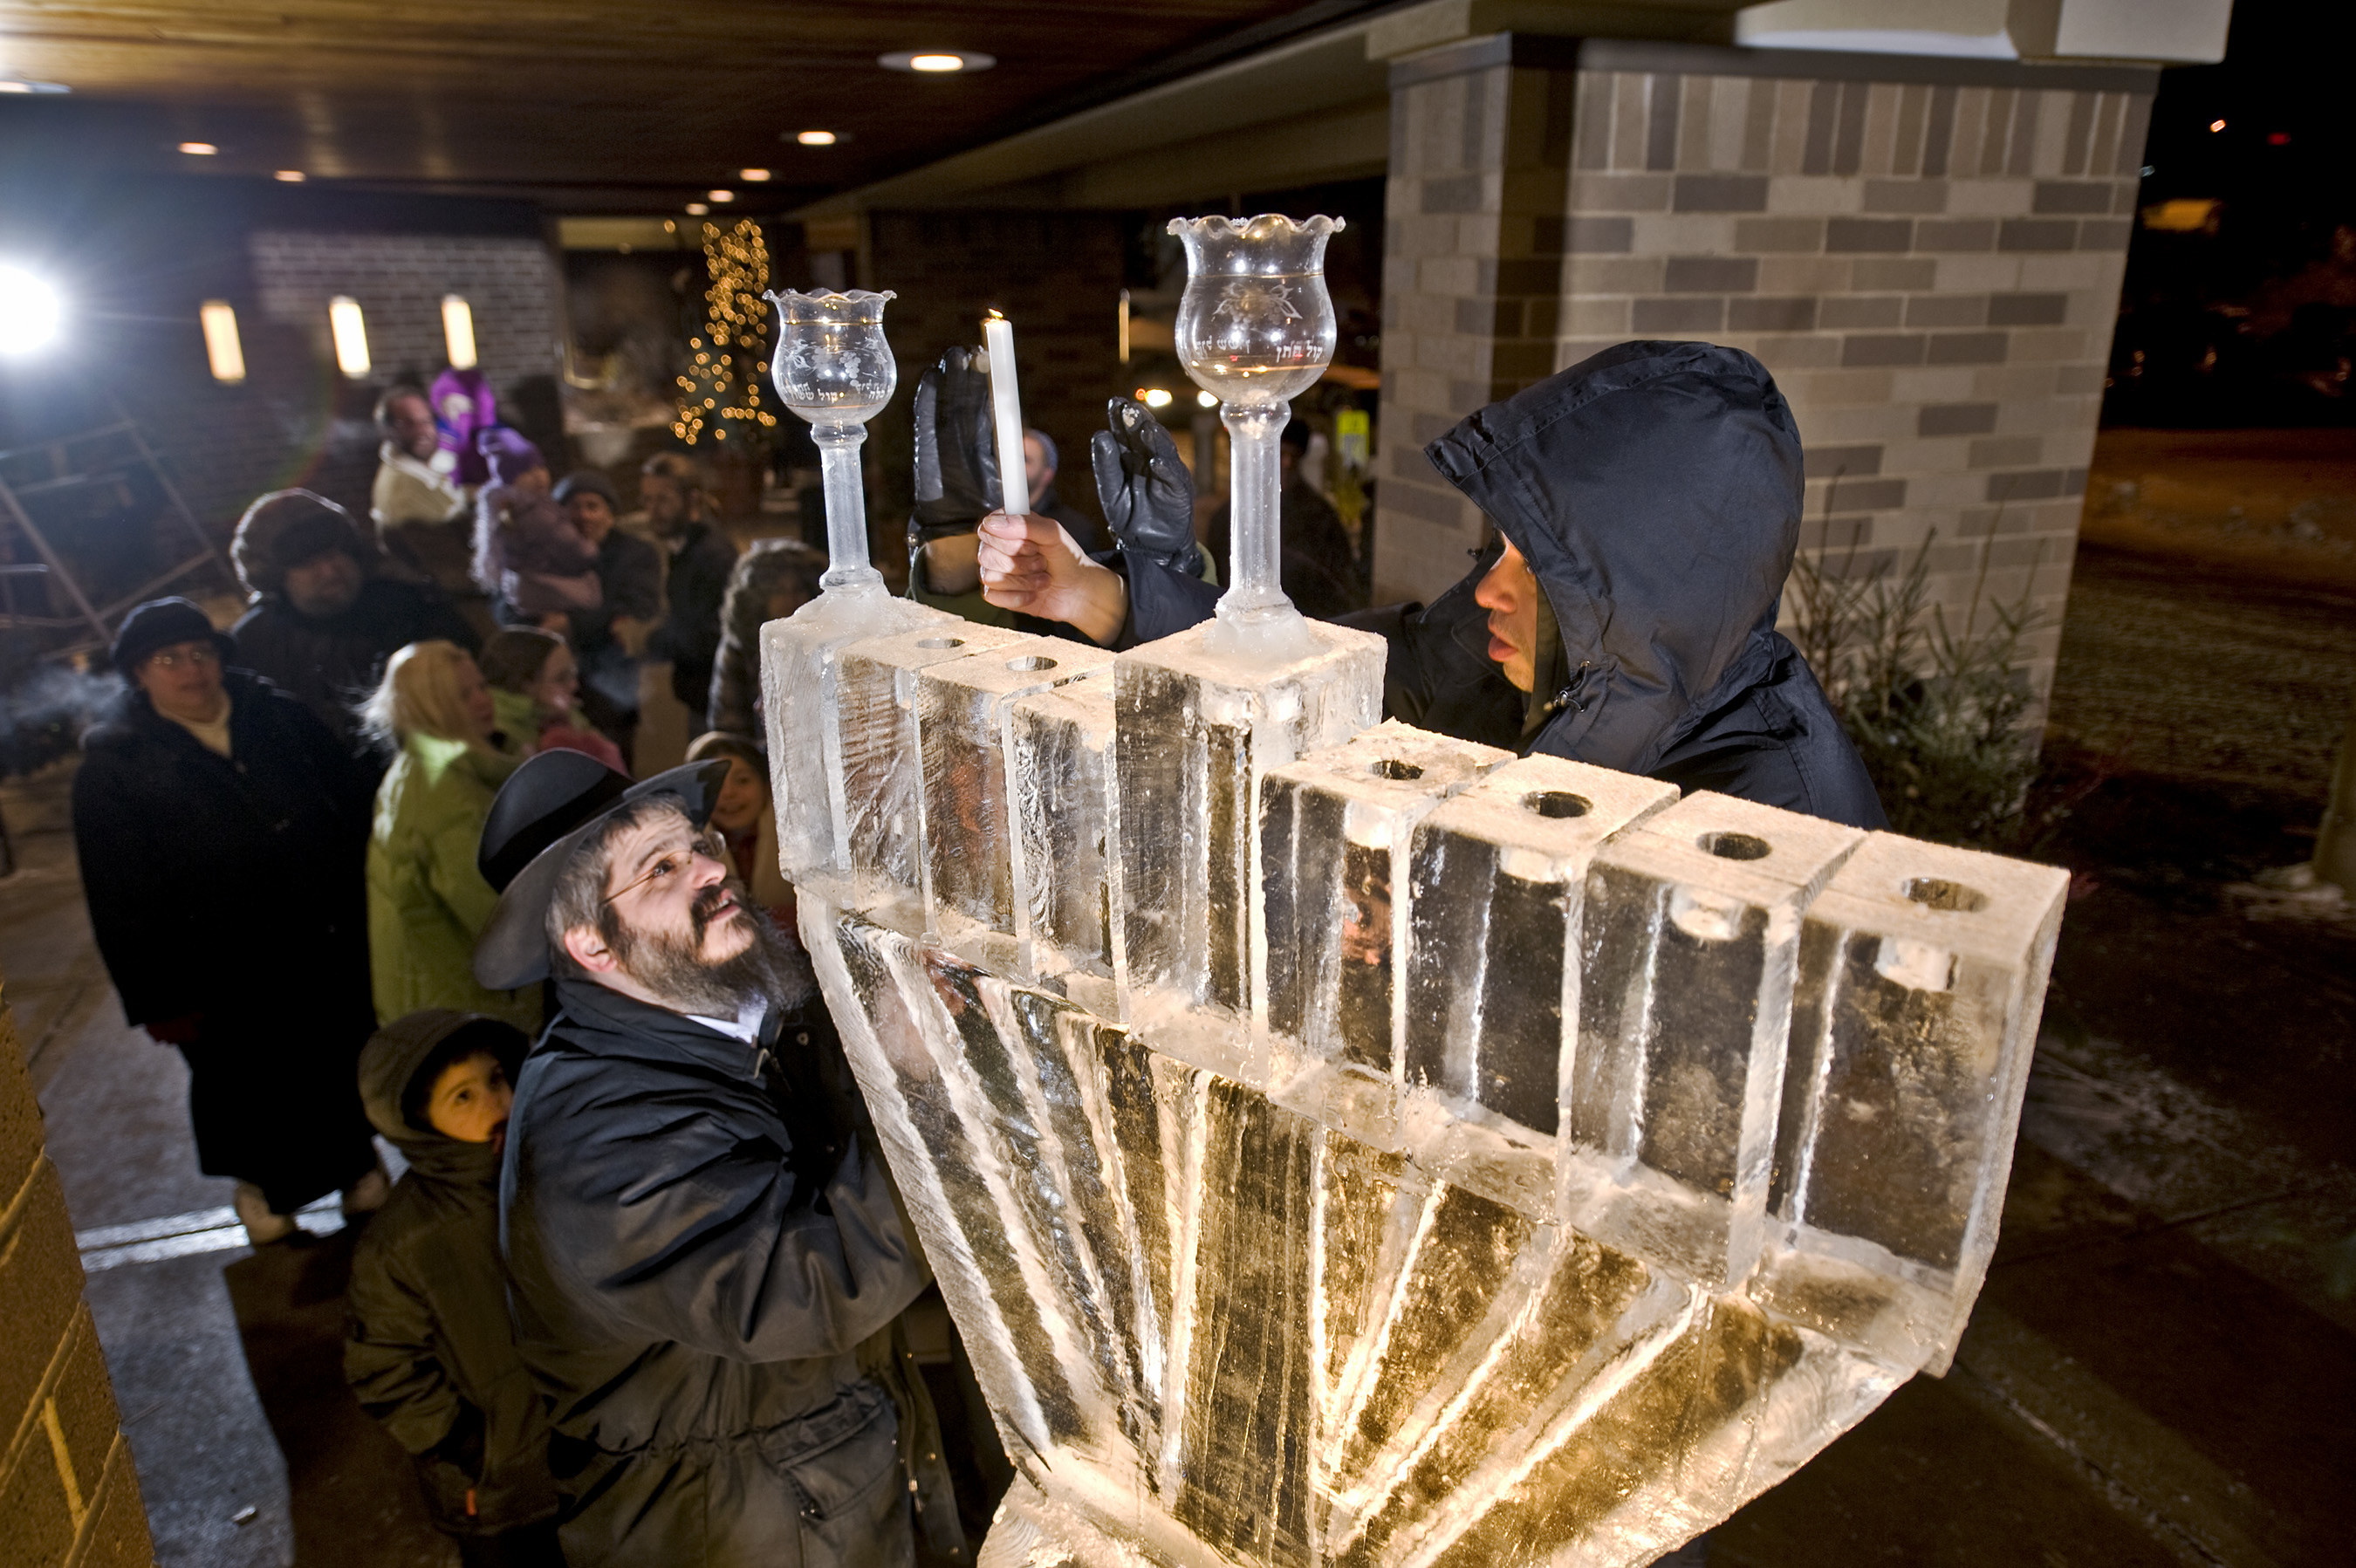 Two men light a menorah made of ice in front of a crowd